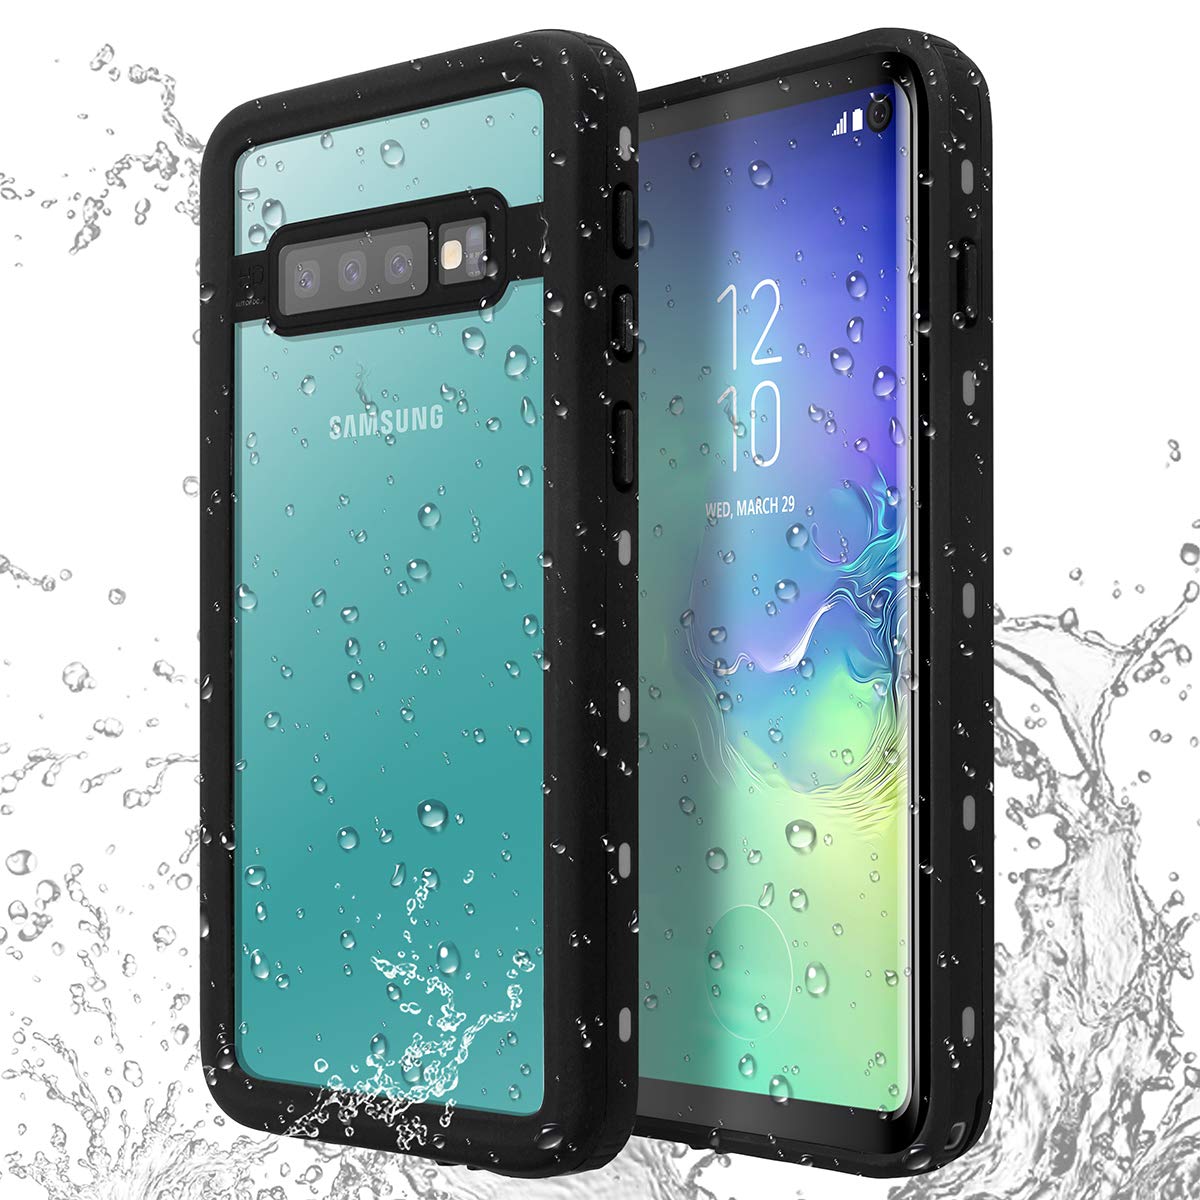 Galaxy S10/Note 9 Waterproof Case IP68 Water Resistant Snowproof Dirtypoof Full Body Protection Transparent Clear Back Case Built-in Screen Protector